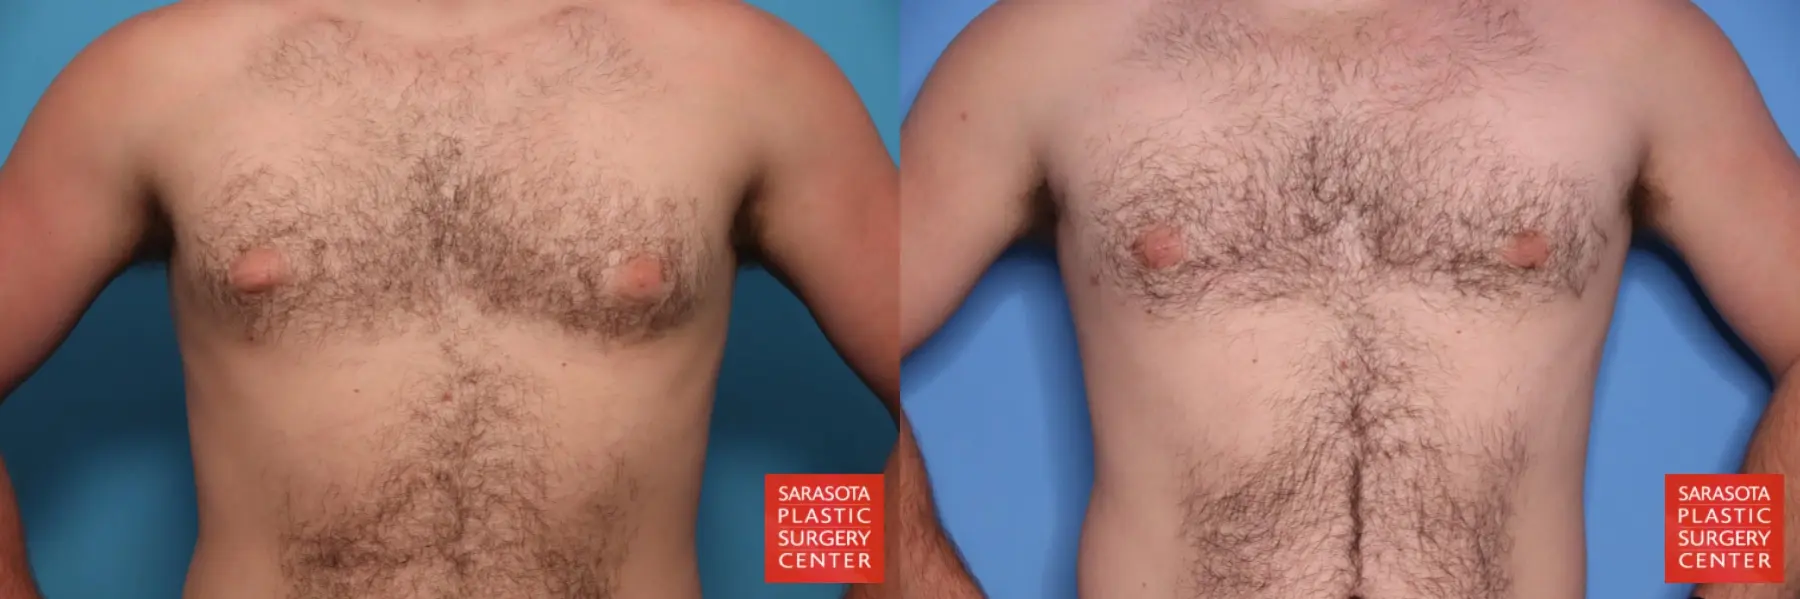 Gynecomastia: Patient 3 - Before and After 6